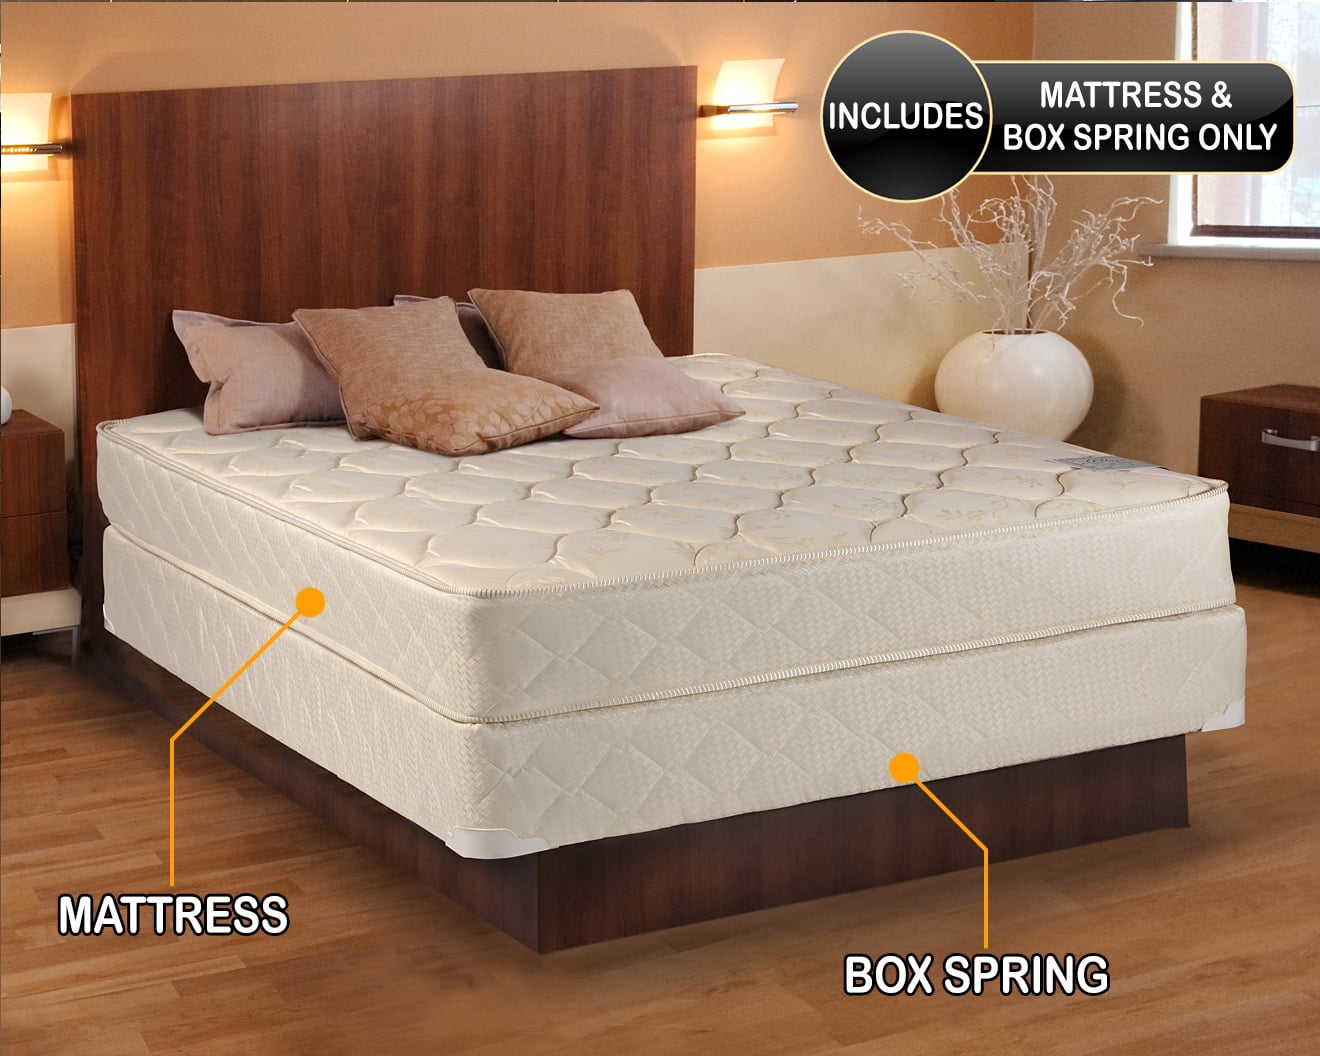 8 inch full size mattress and boxspring